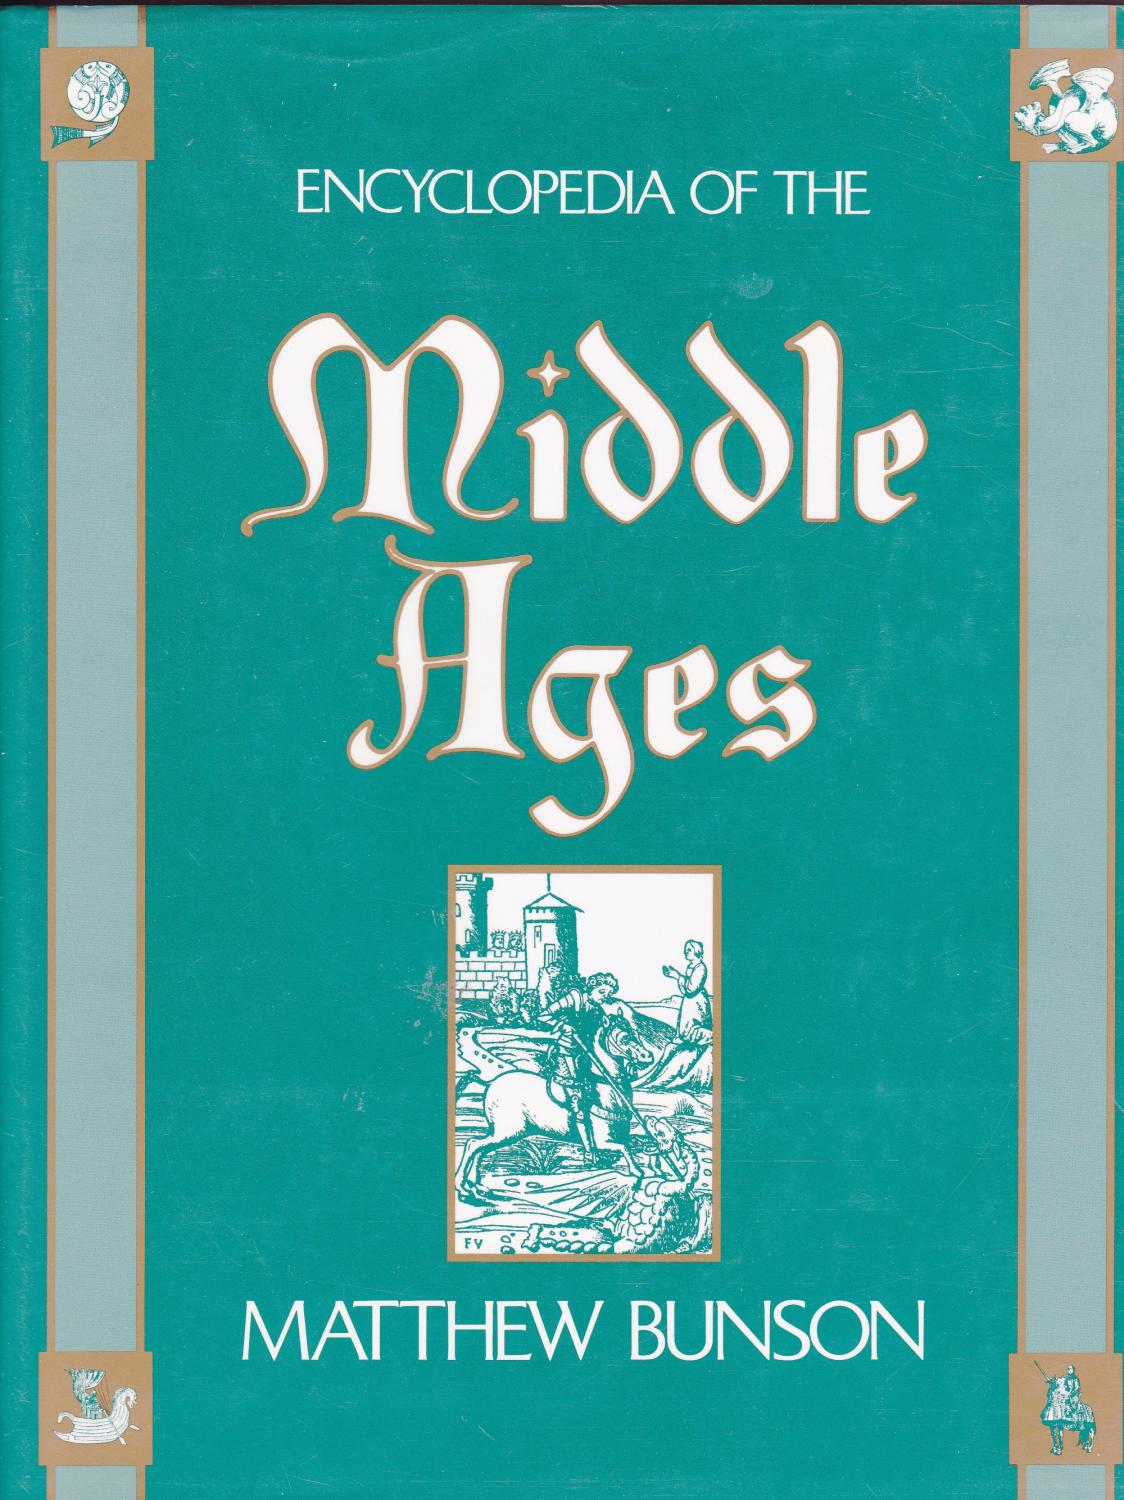 Matthew Bunson - Encyclopedia of the Middle Ages